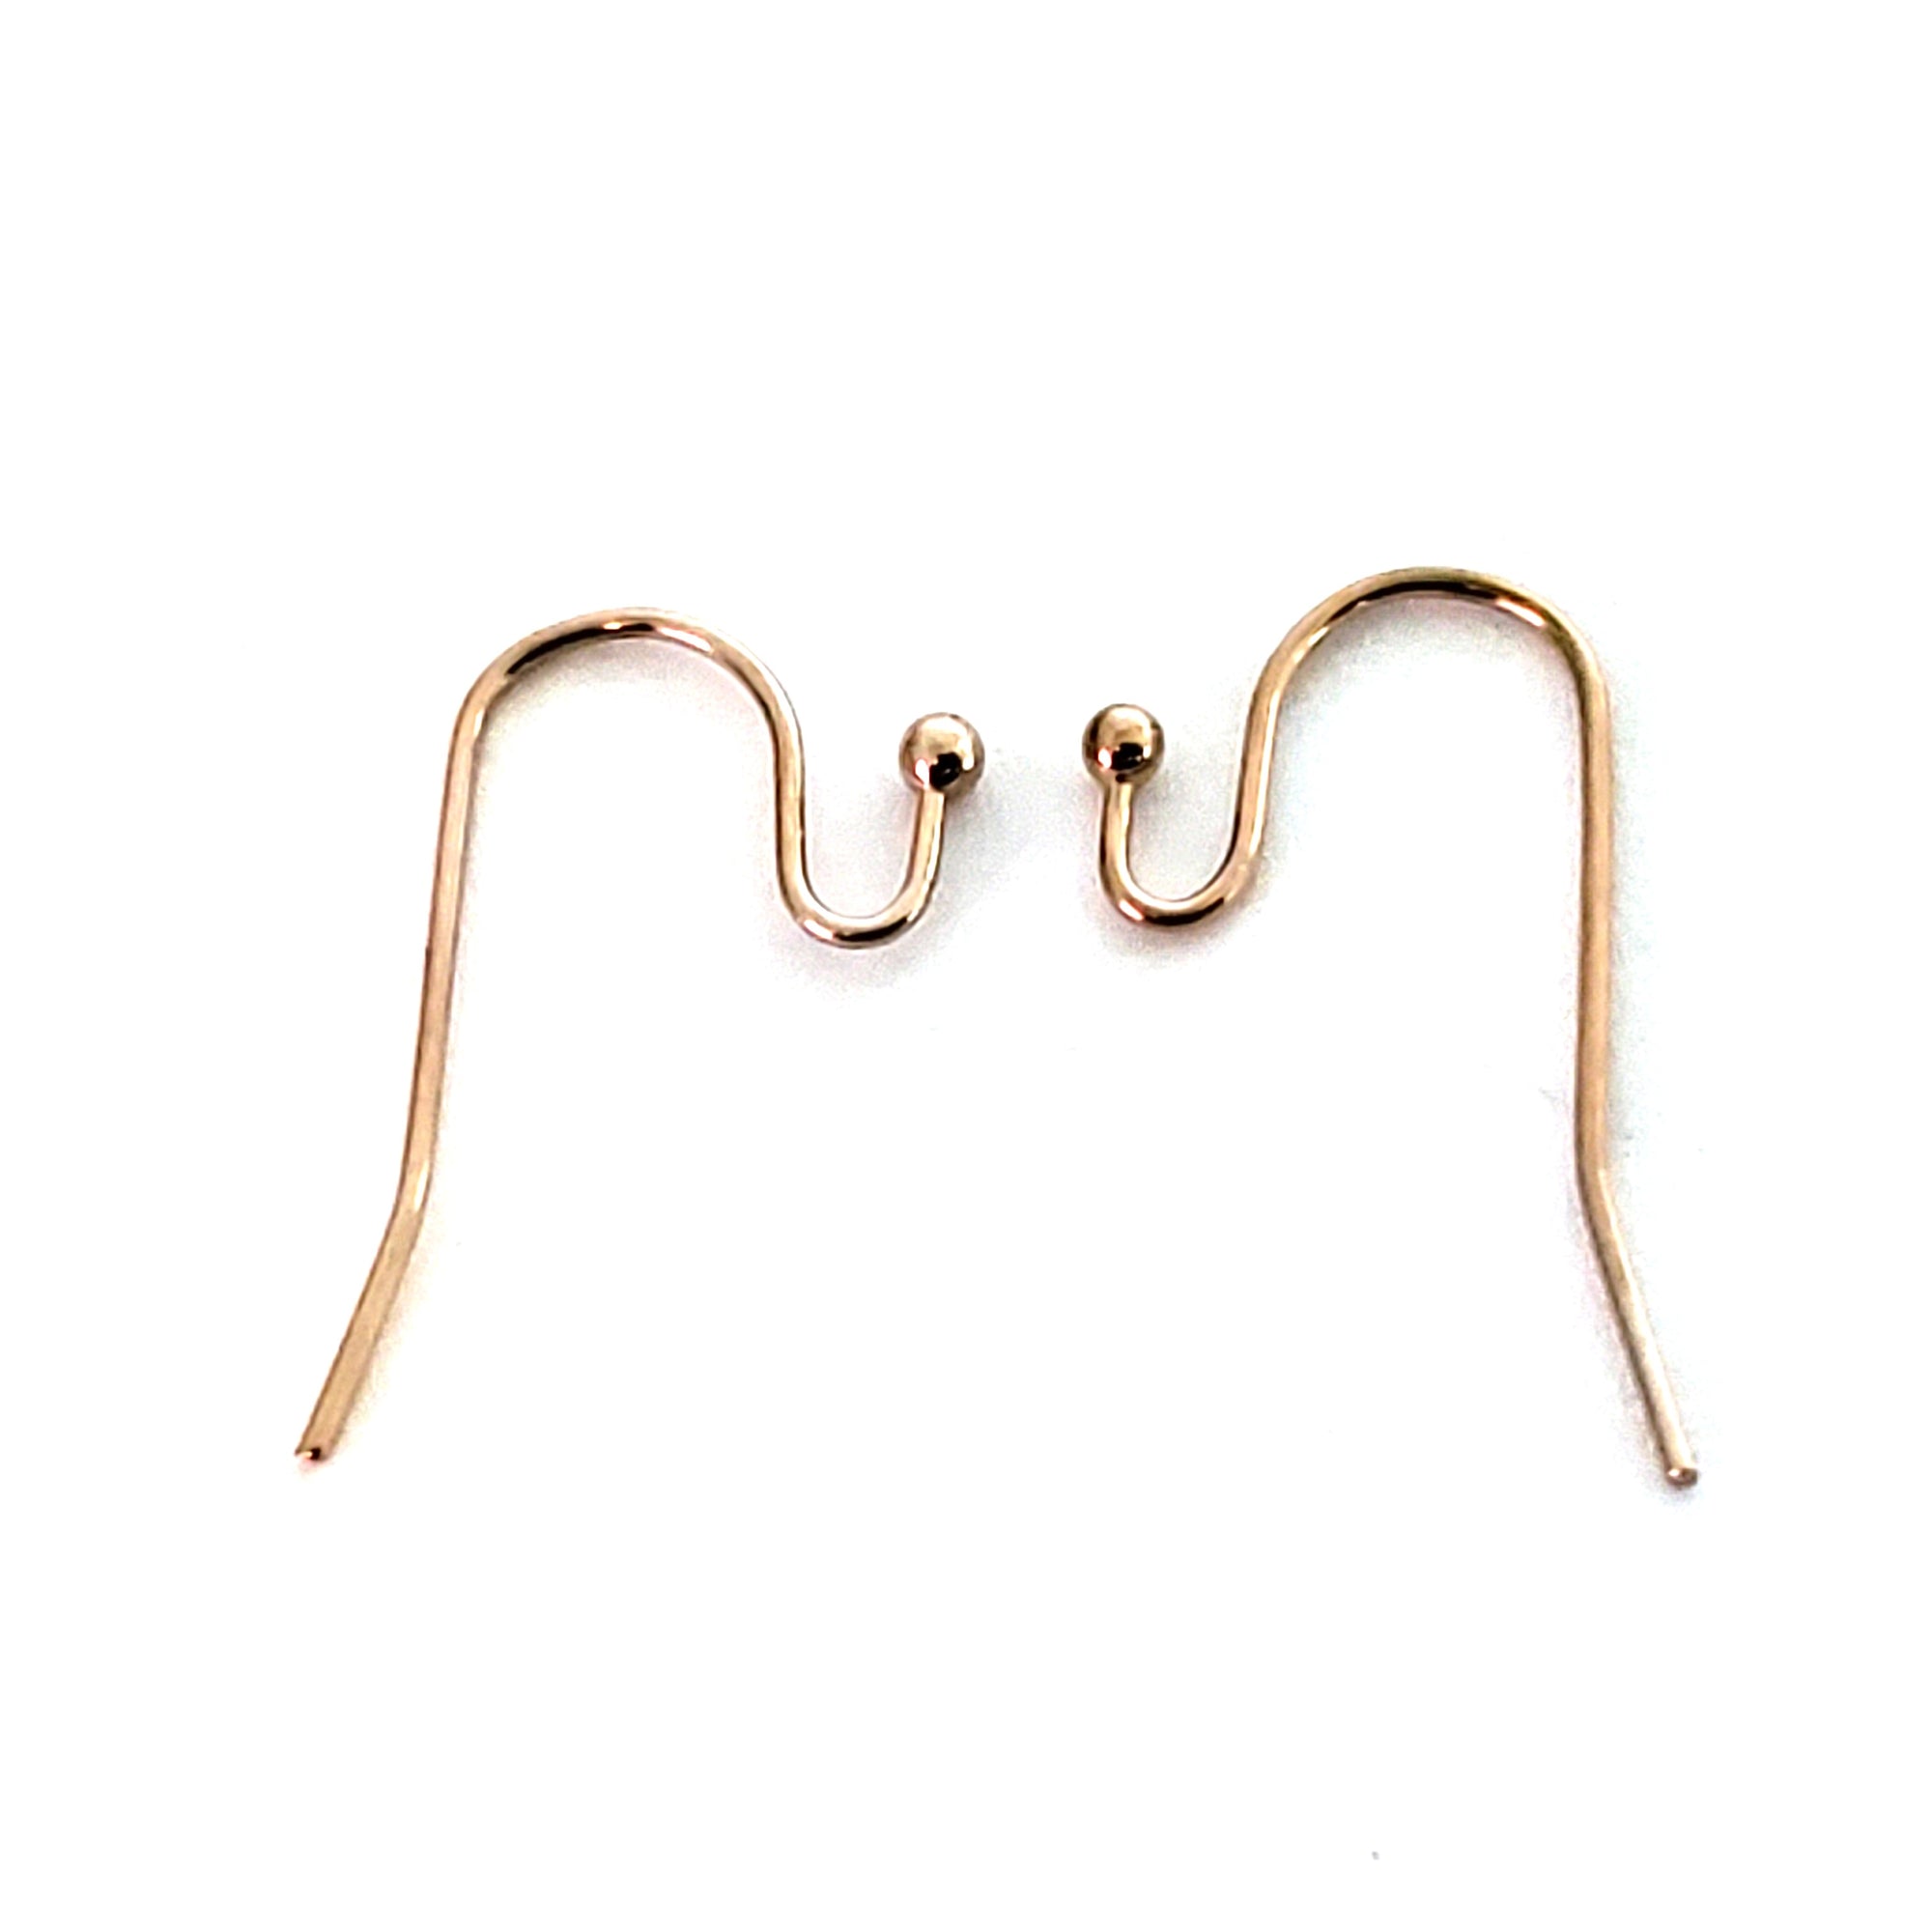 Elegant Ear Wire Hooks for Stunning Jewelry Designs